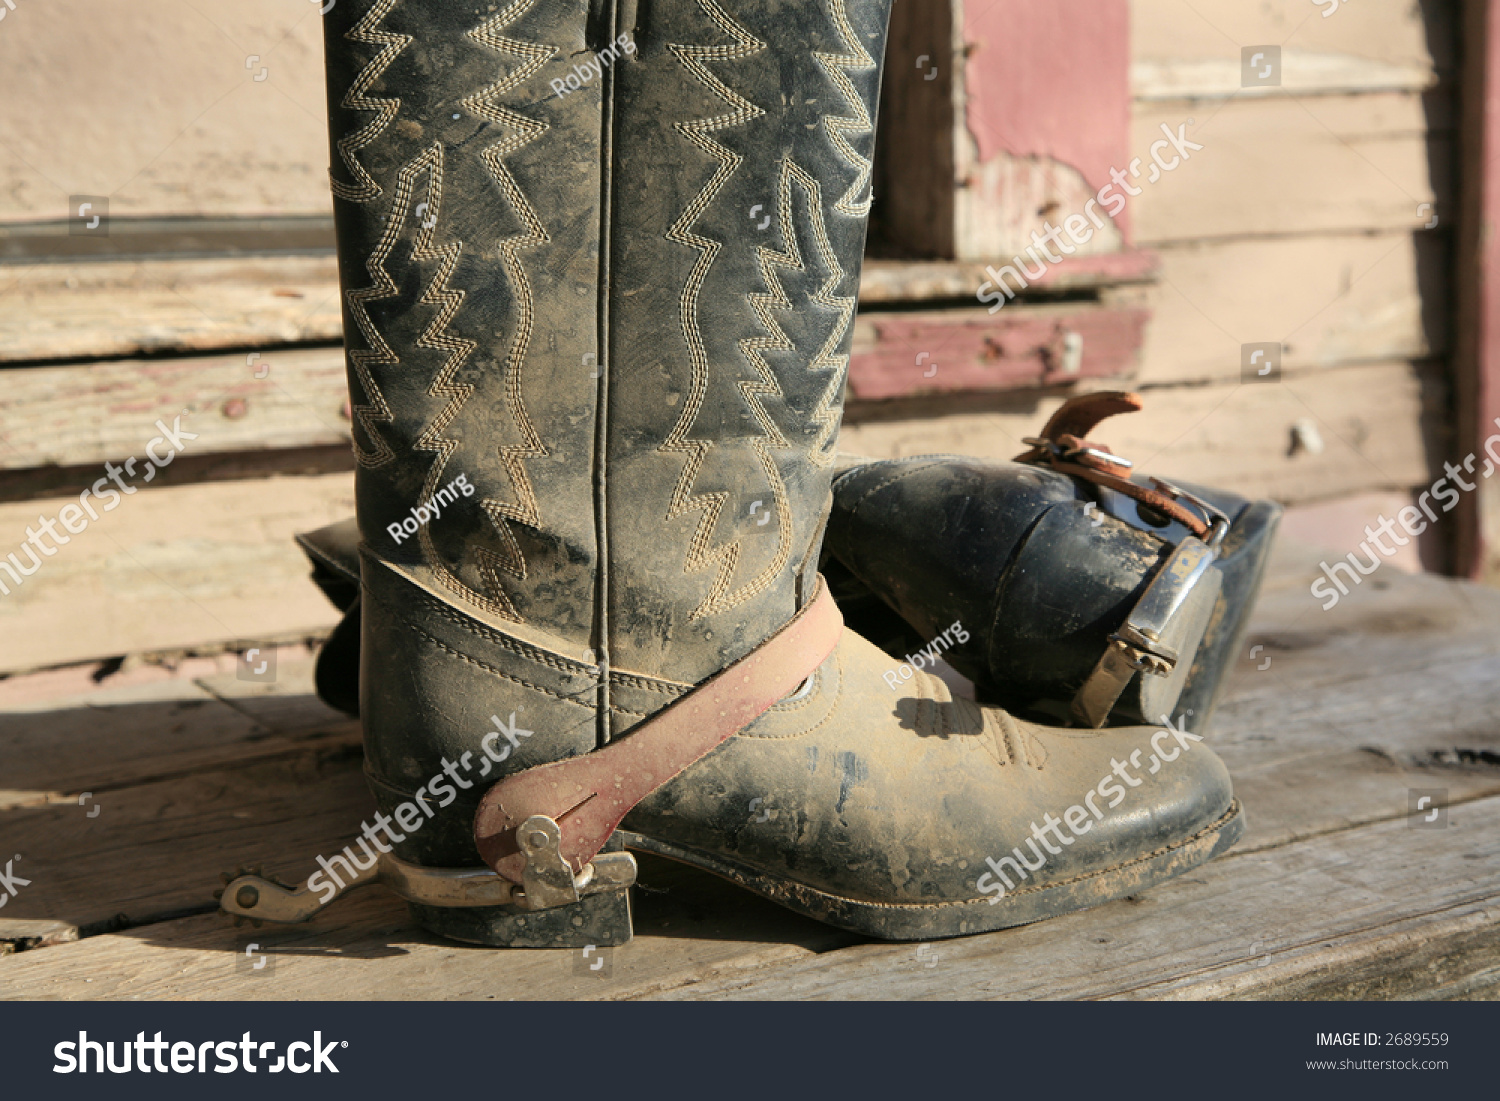 Old Dirty Cowboy Boots With Spurs On Rustic Front Porch Stock Photo ...